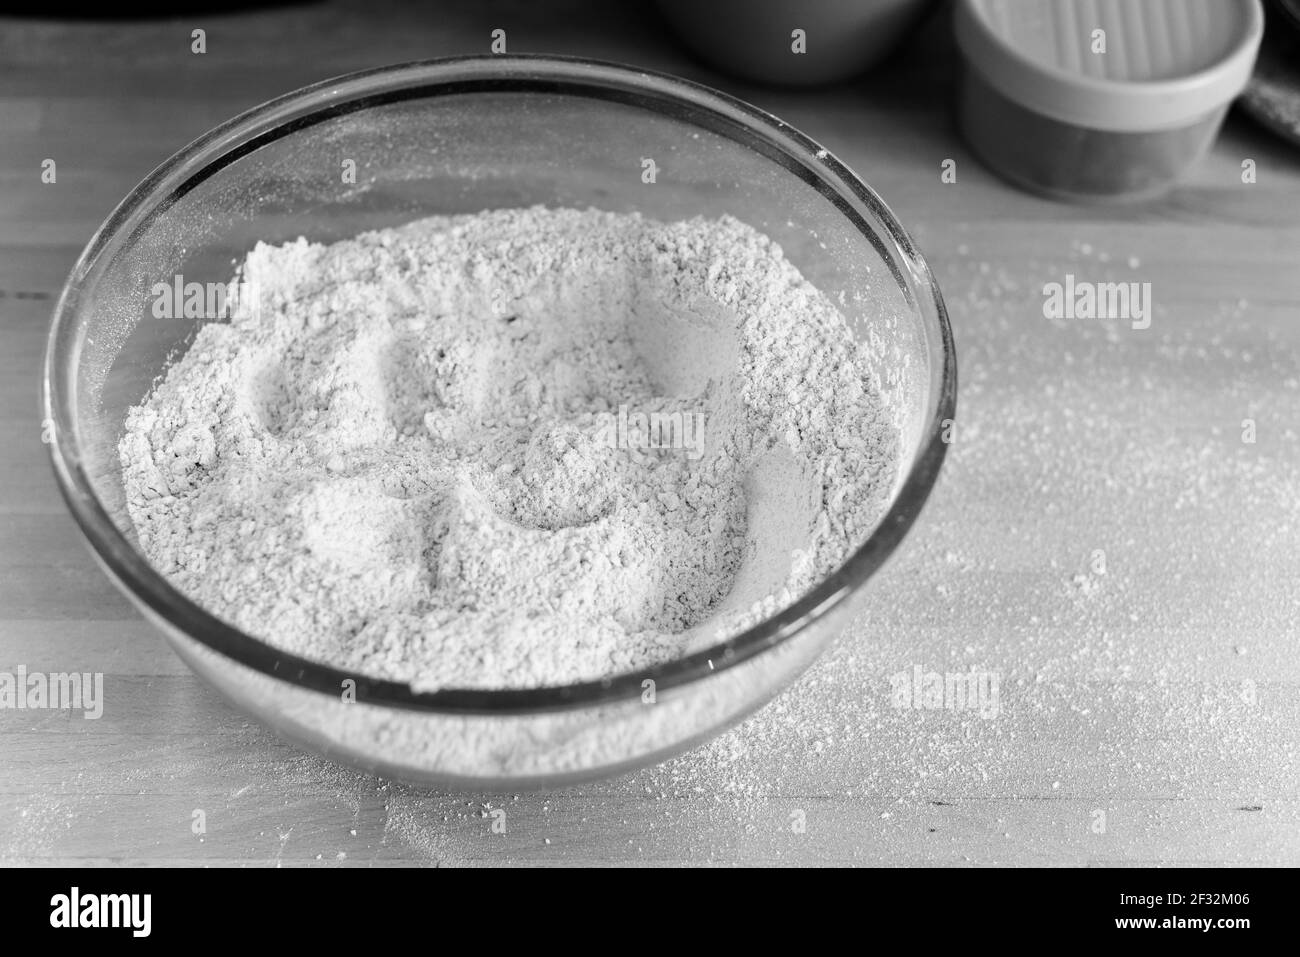 Raw ingredients of flour and yeast for making a loaf of bread at home Stock Photo